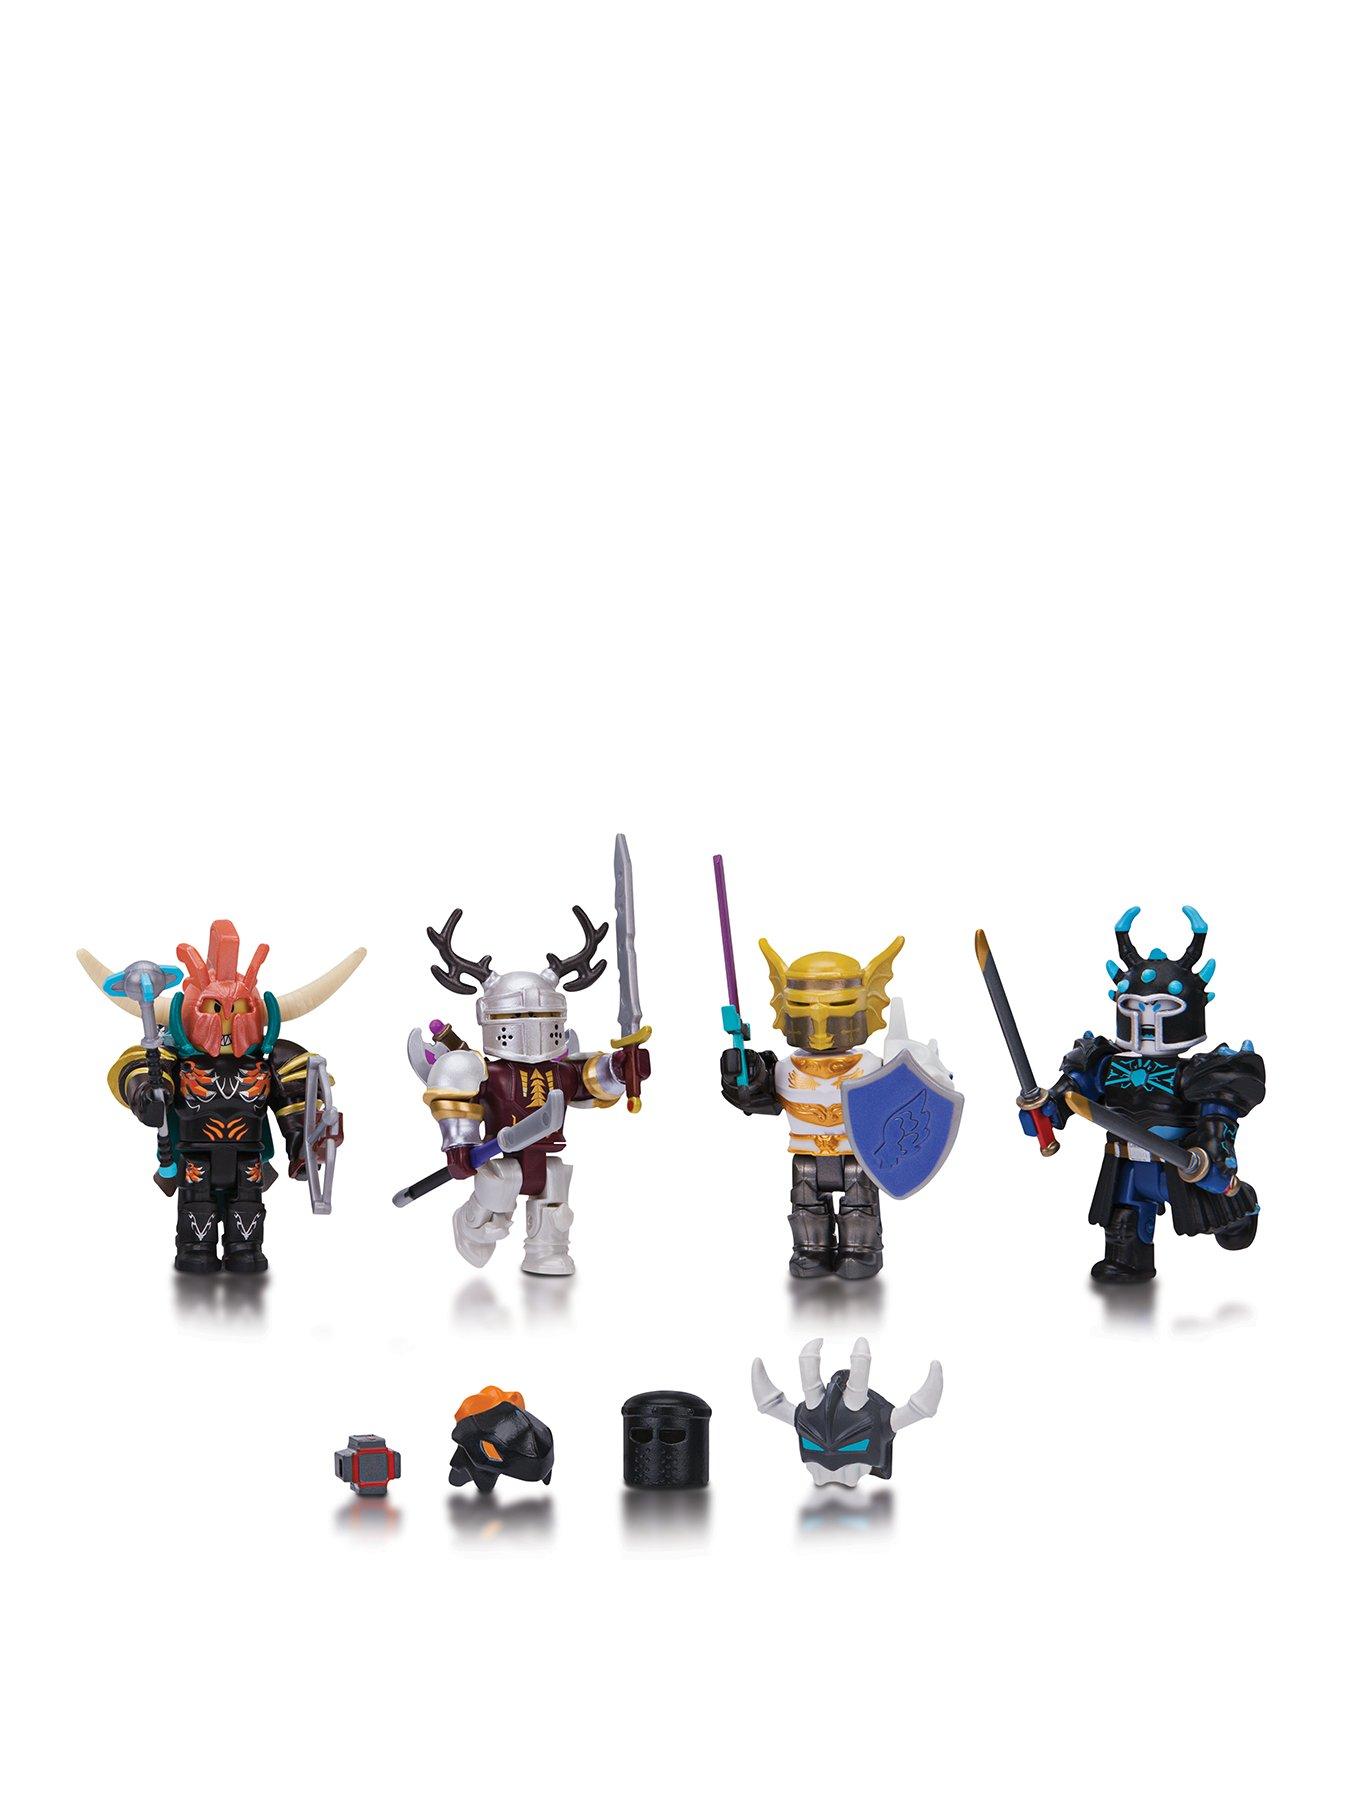 Roblox Build A Figure Days Of Knights - 141 best roblox images in 2019 roblox pictures roblox